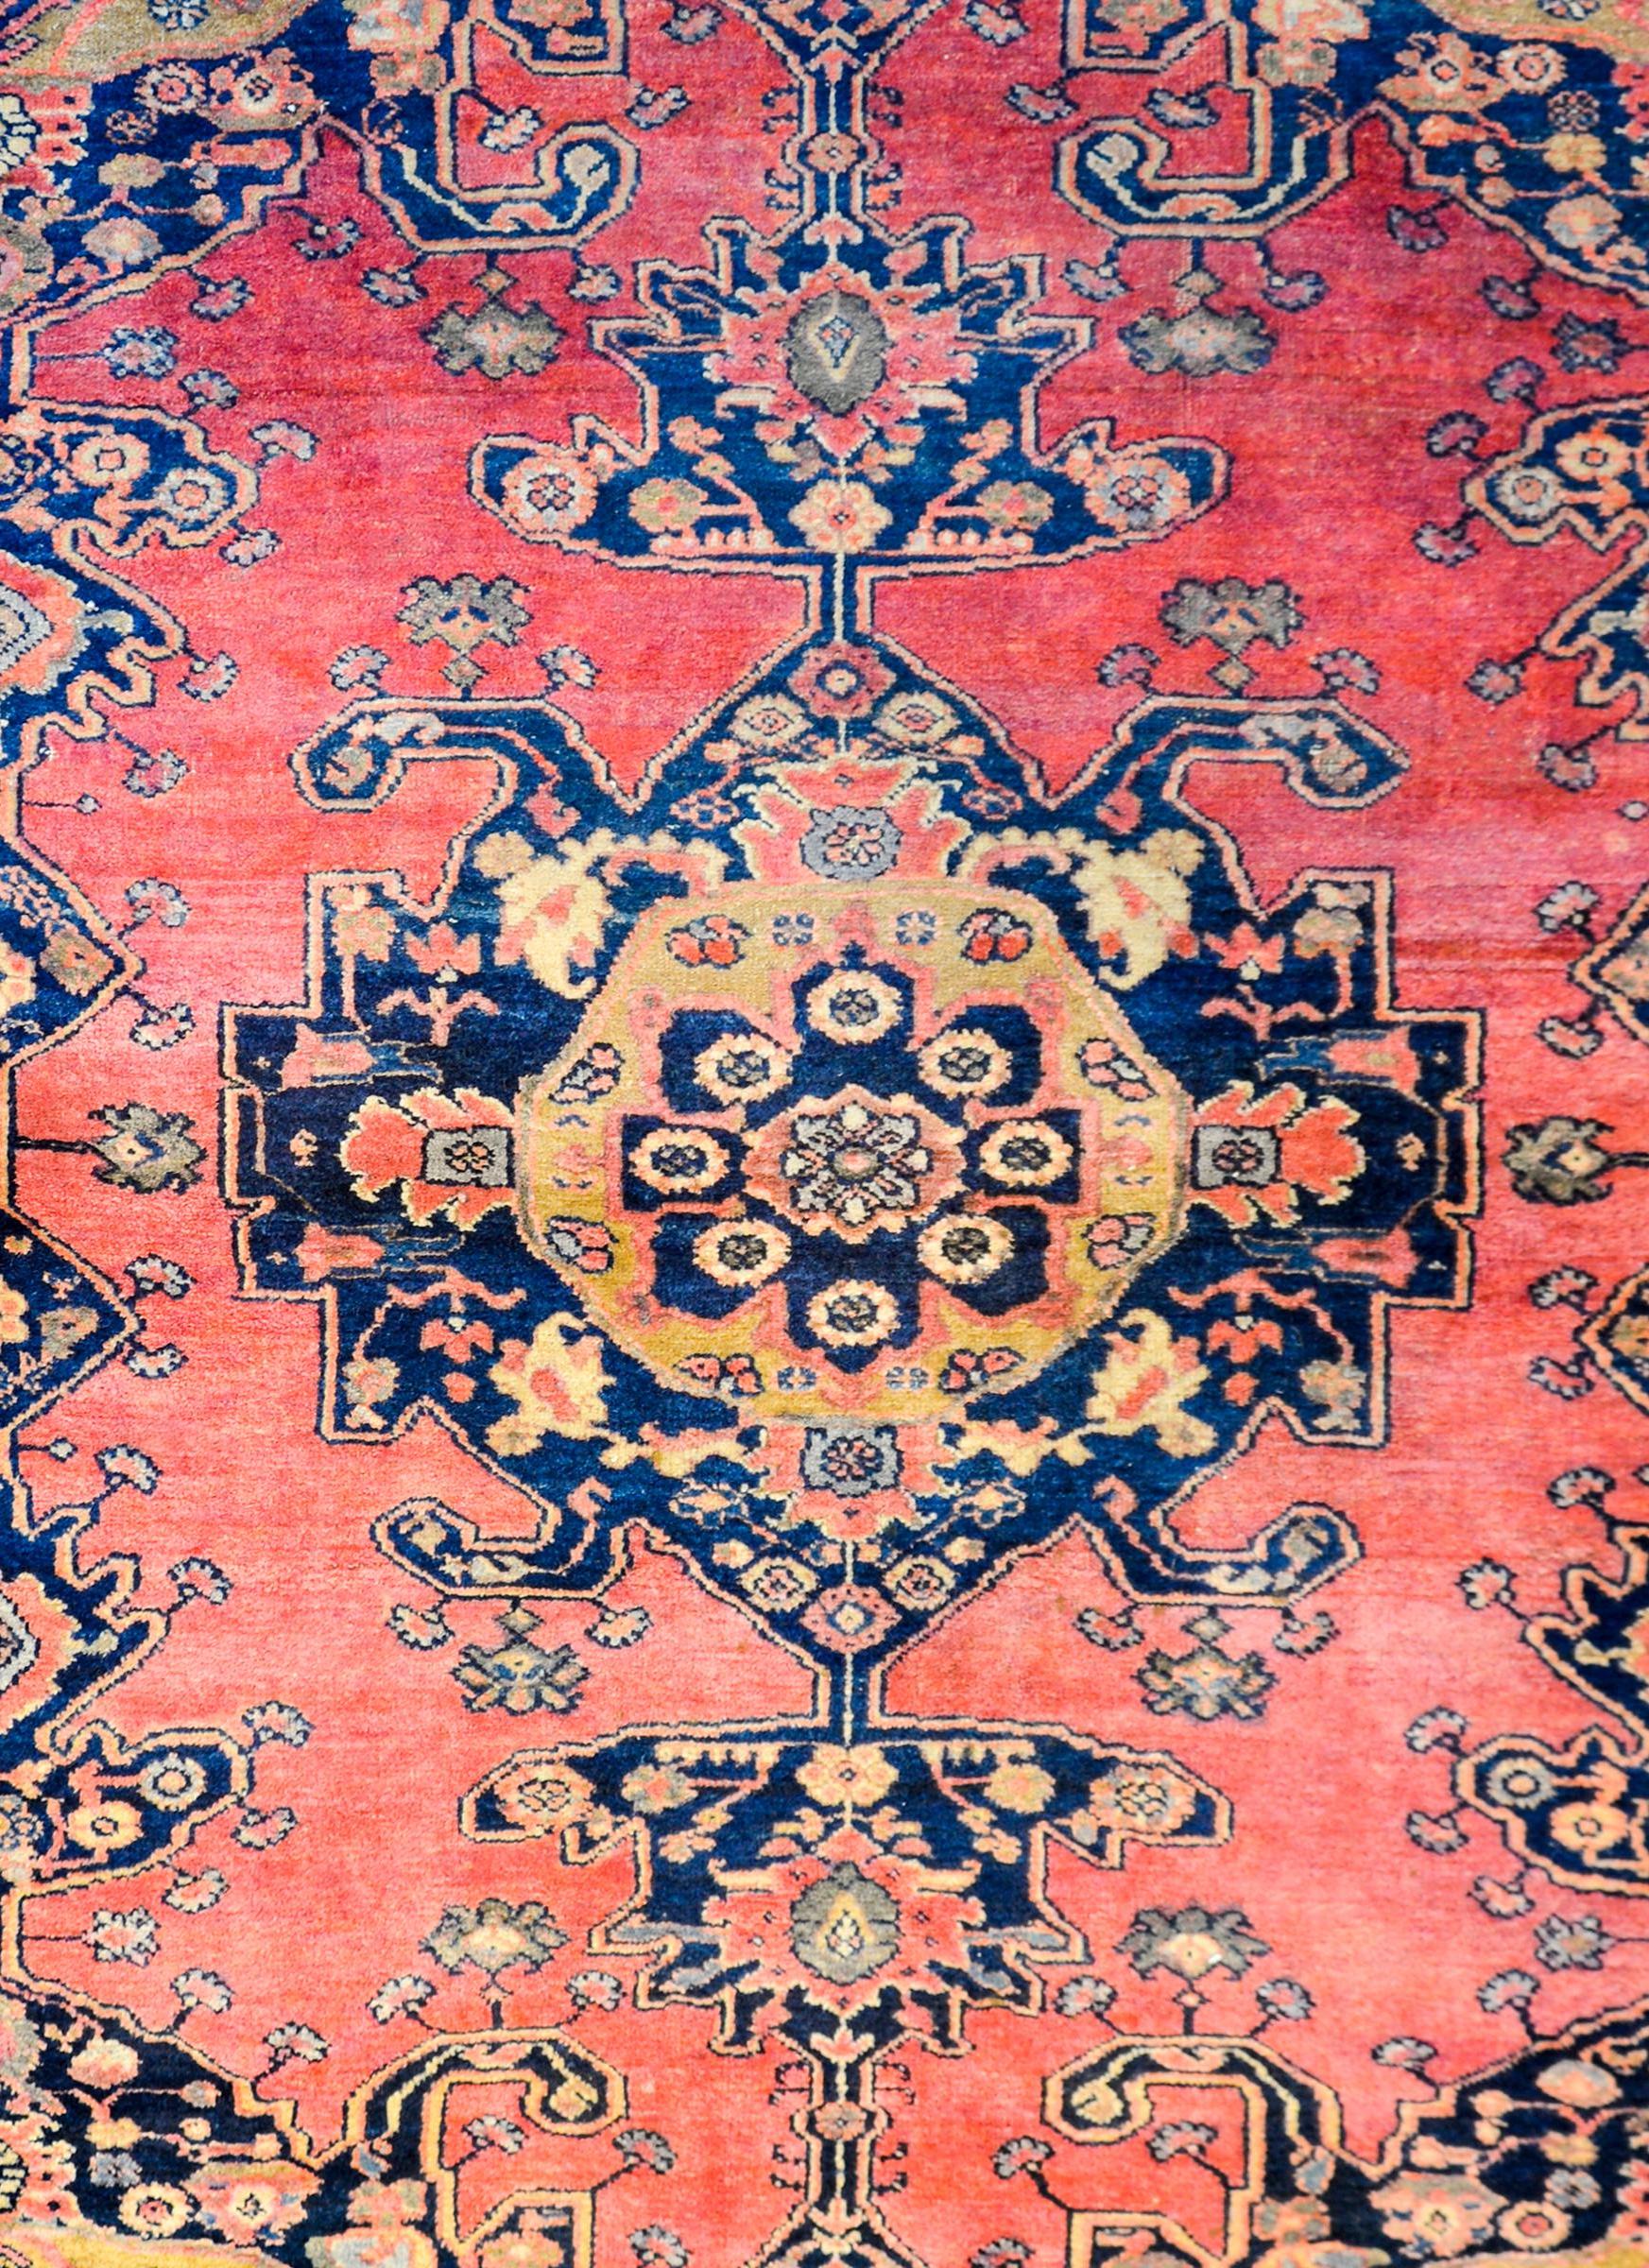 A gorgeous early 20th century Persian Nehevand rug with a large-scale bold tribal pattern containing a large medallion with stylized flowers woven in gold, salmon, indigo, and cream colored wool on a beautiful abrash salmon ground. The border is